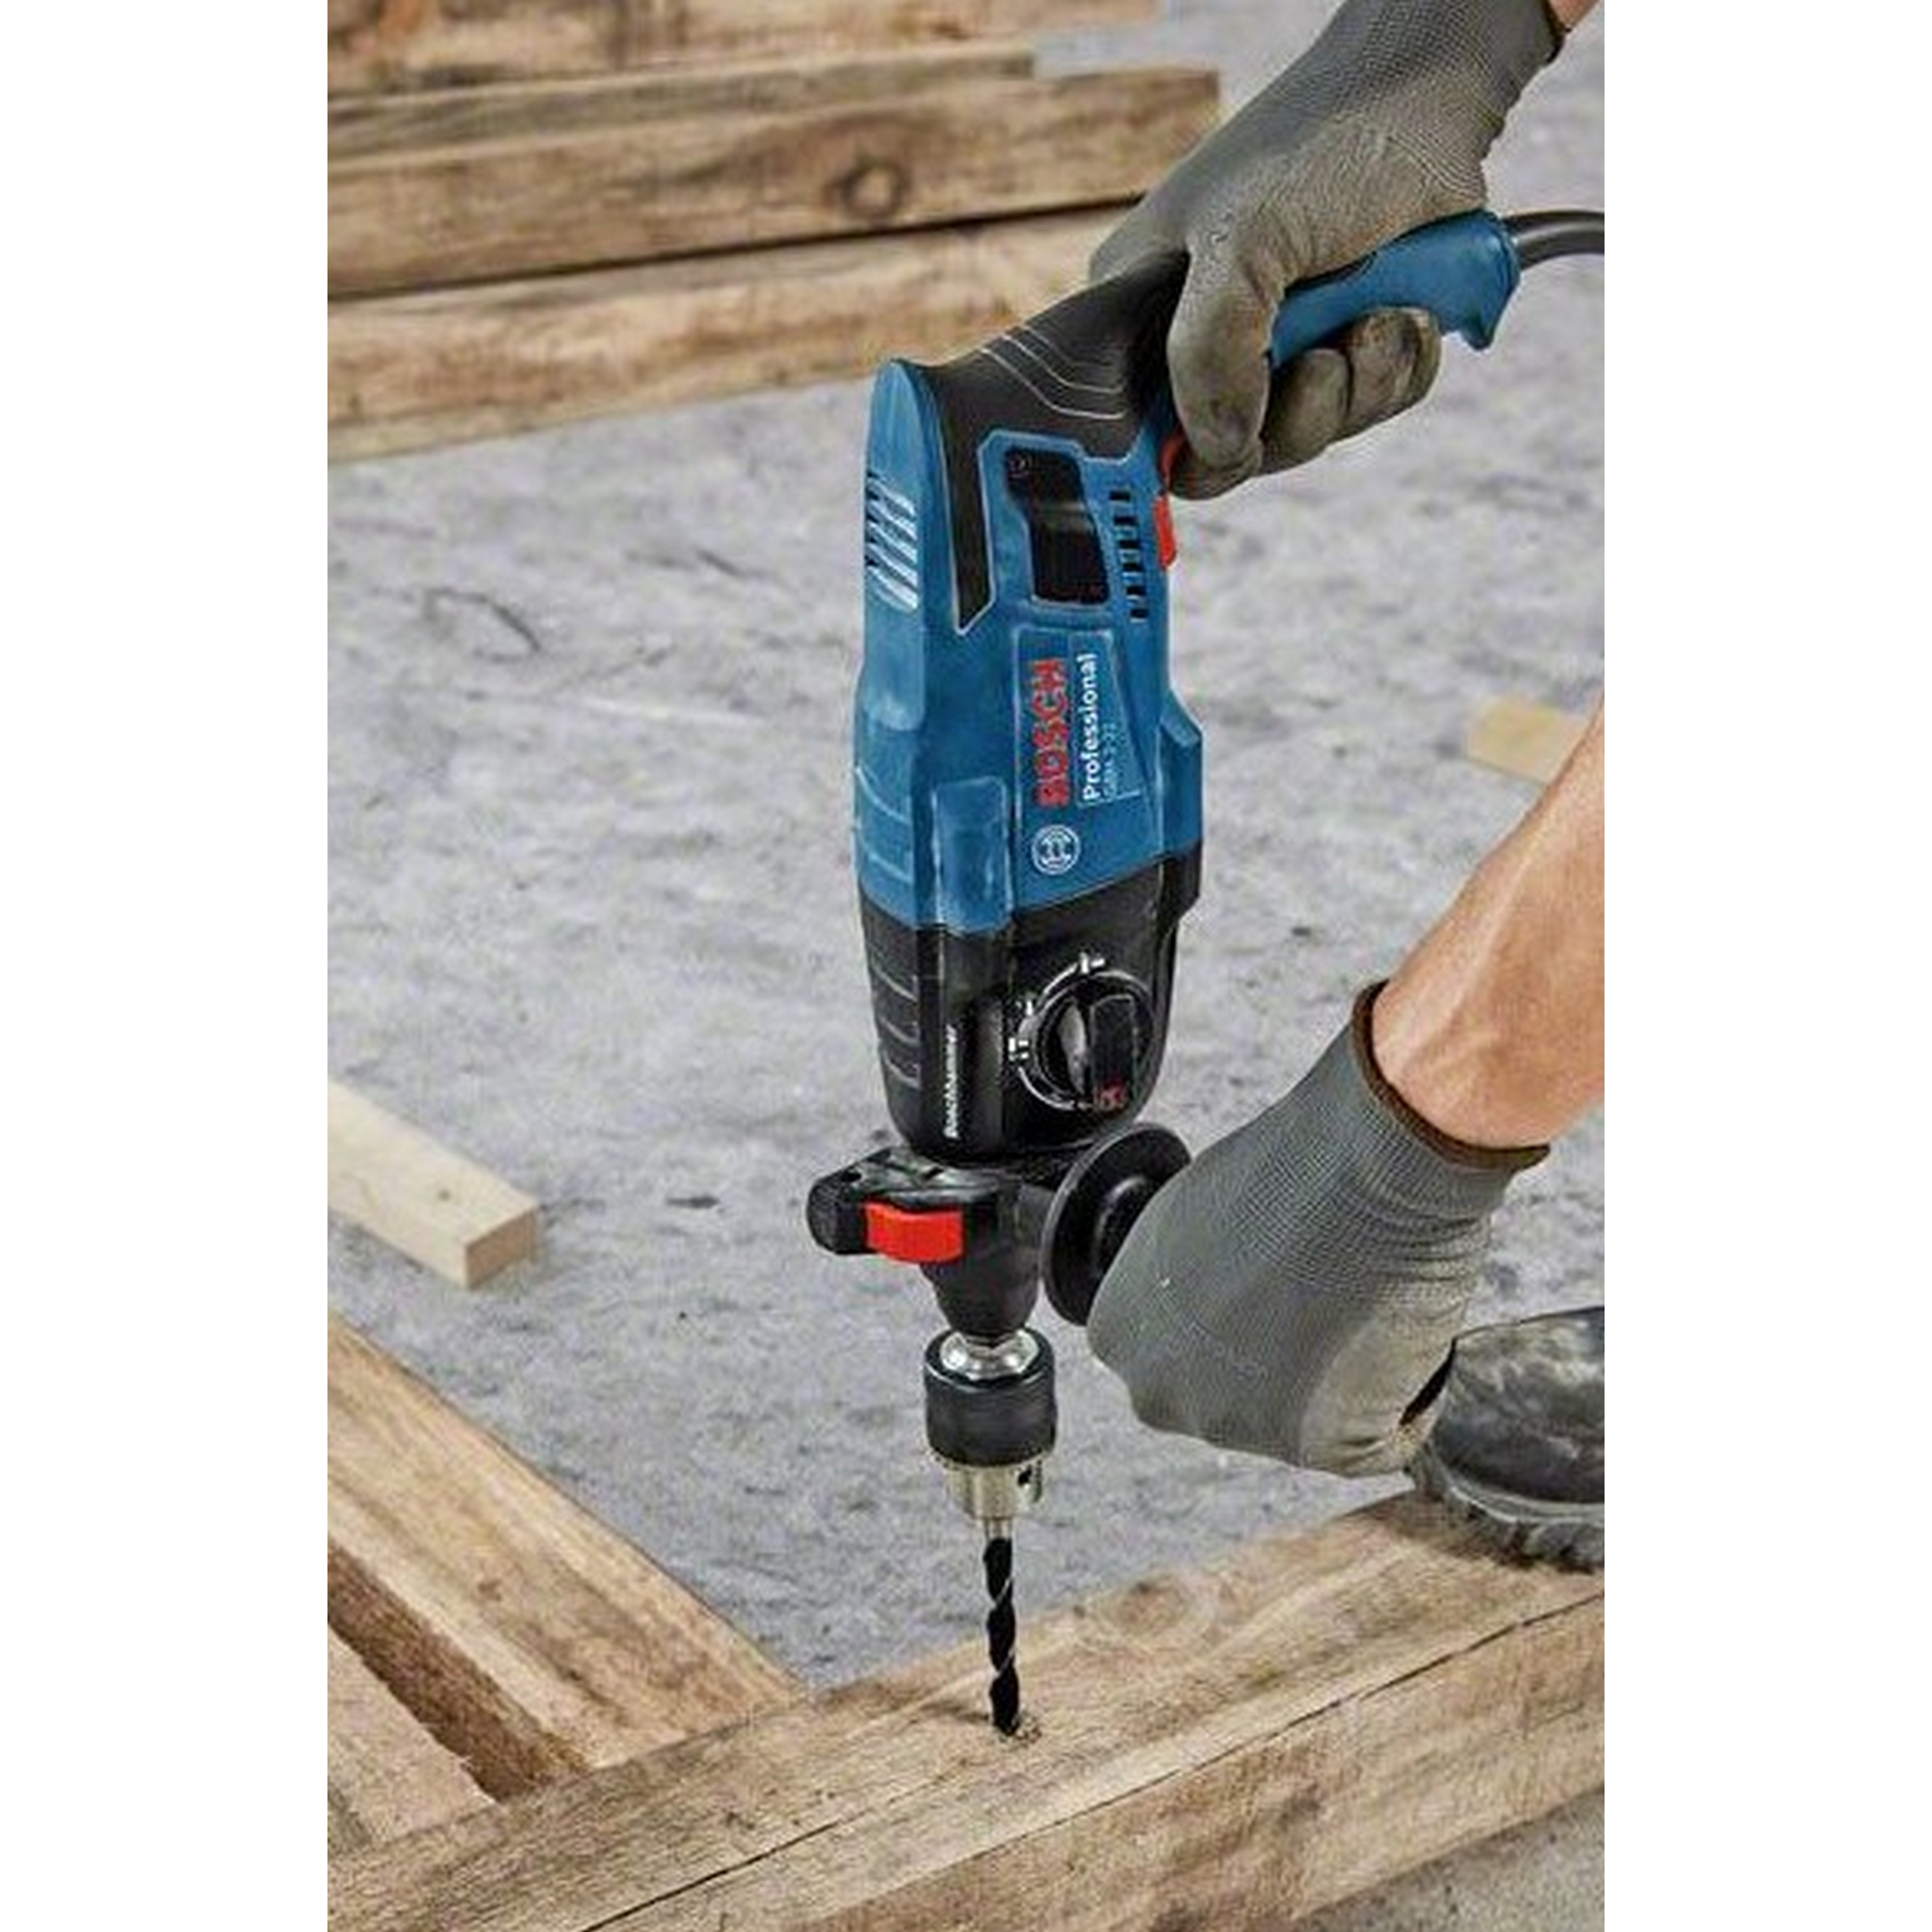 Bohrhammer 'GBH 2-21' 720 W 2 J + product picture